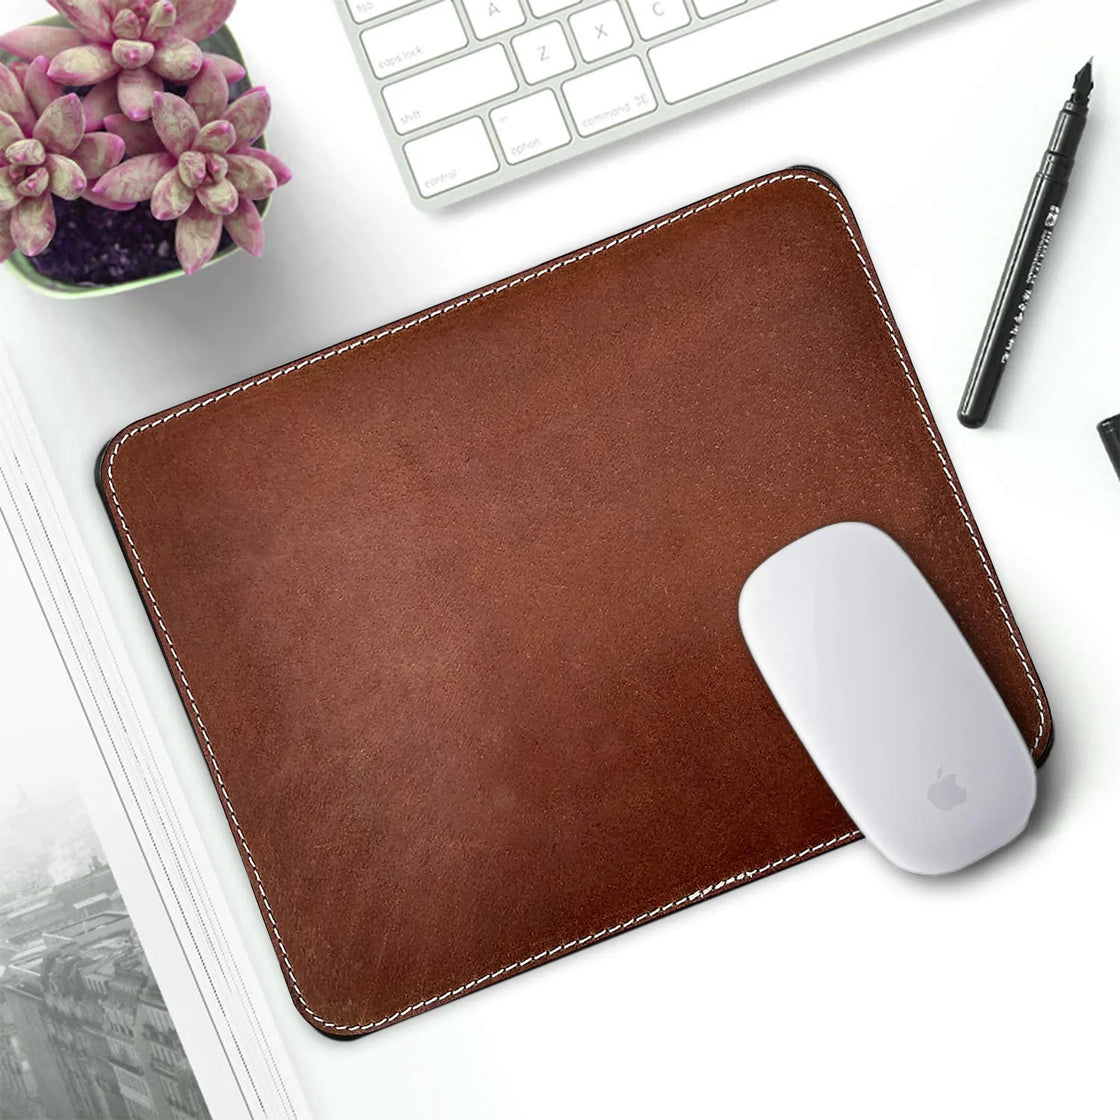 Gaming Mouse Pad Large Desk Accessories for Men Desk Mat Protector Computer  Office Desktop Pc Setup Organizers Home Table Game Decor Big Mouse Pad